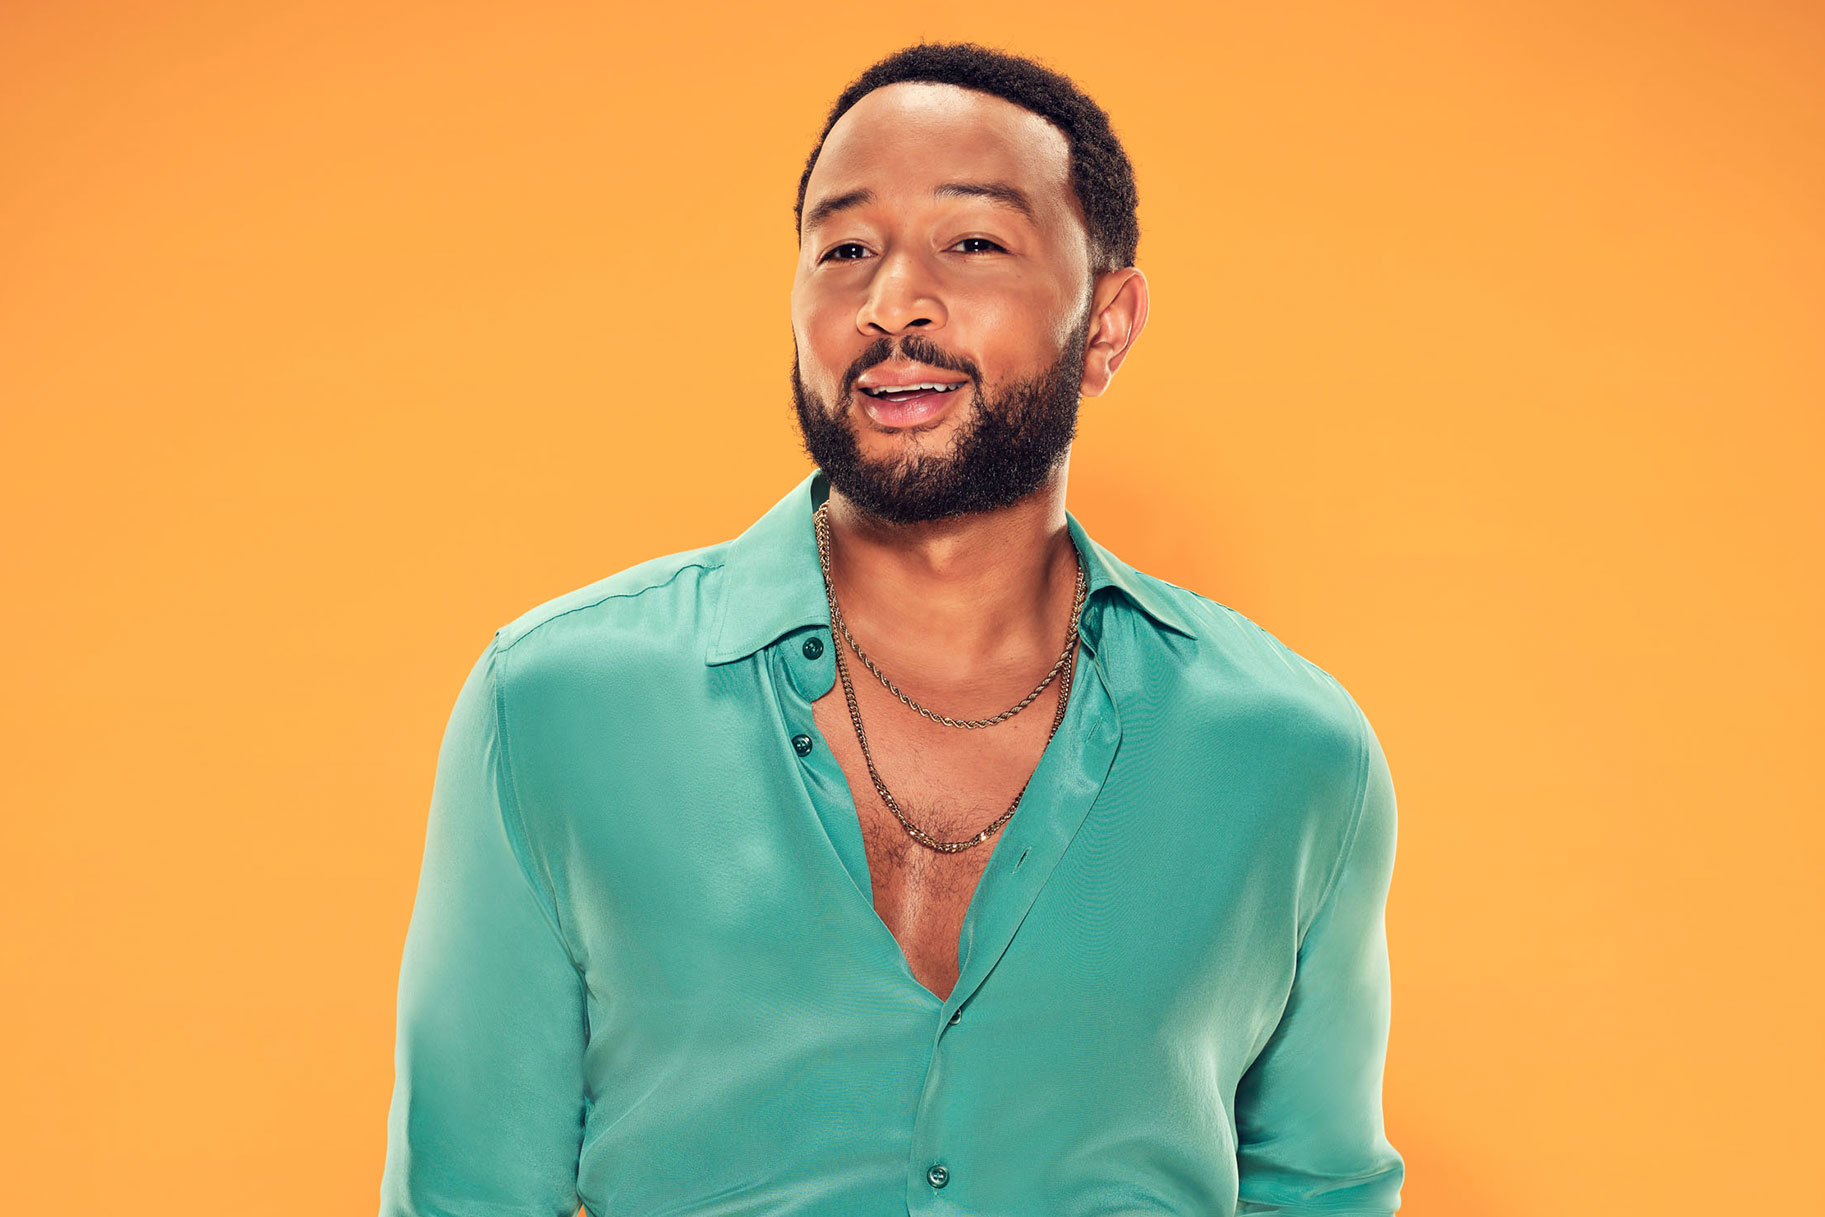 John Legend posing with a smirk on his face